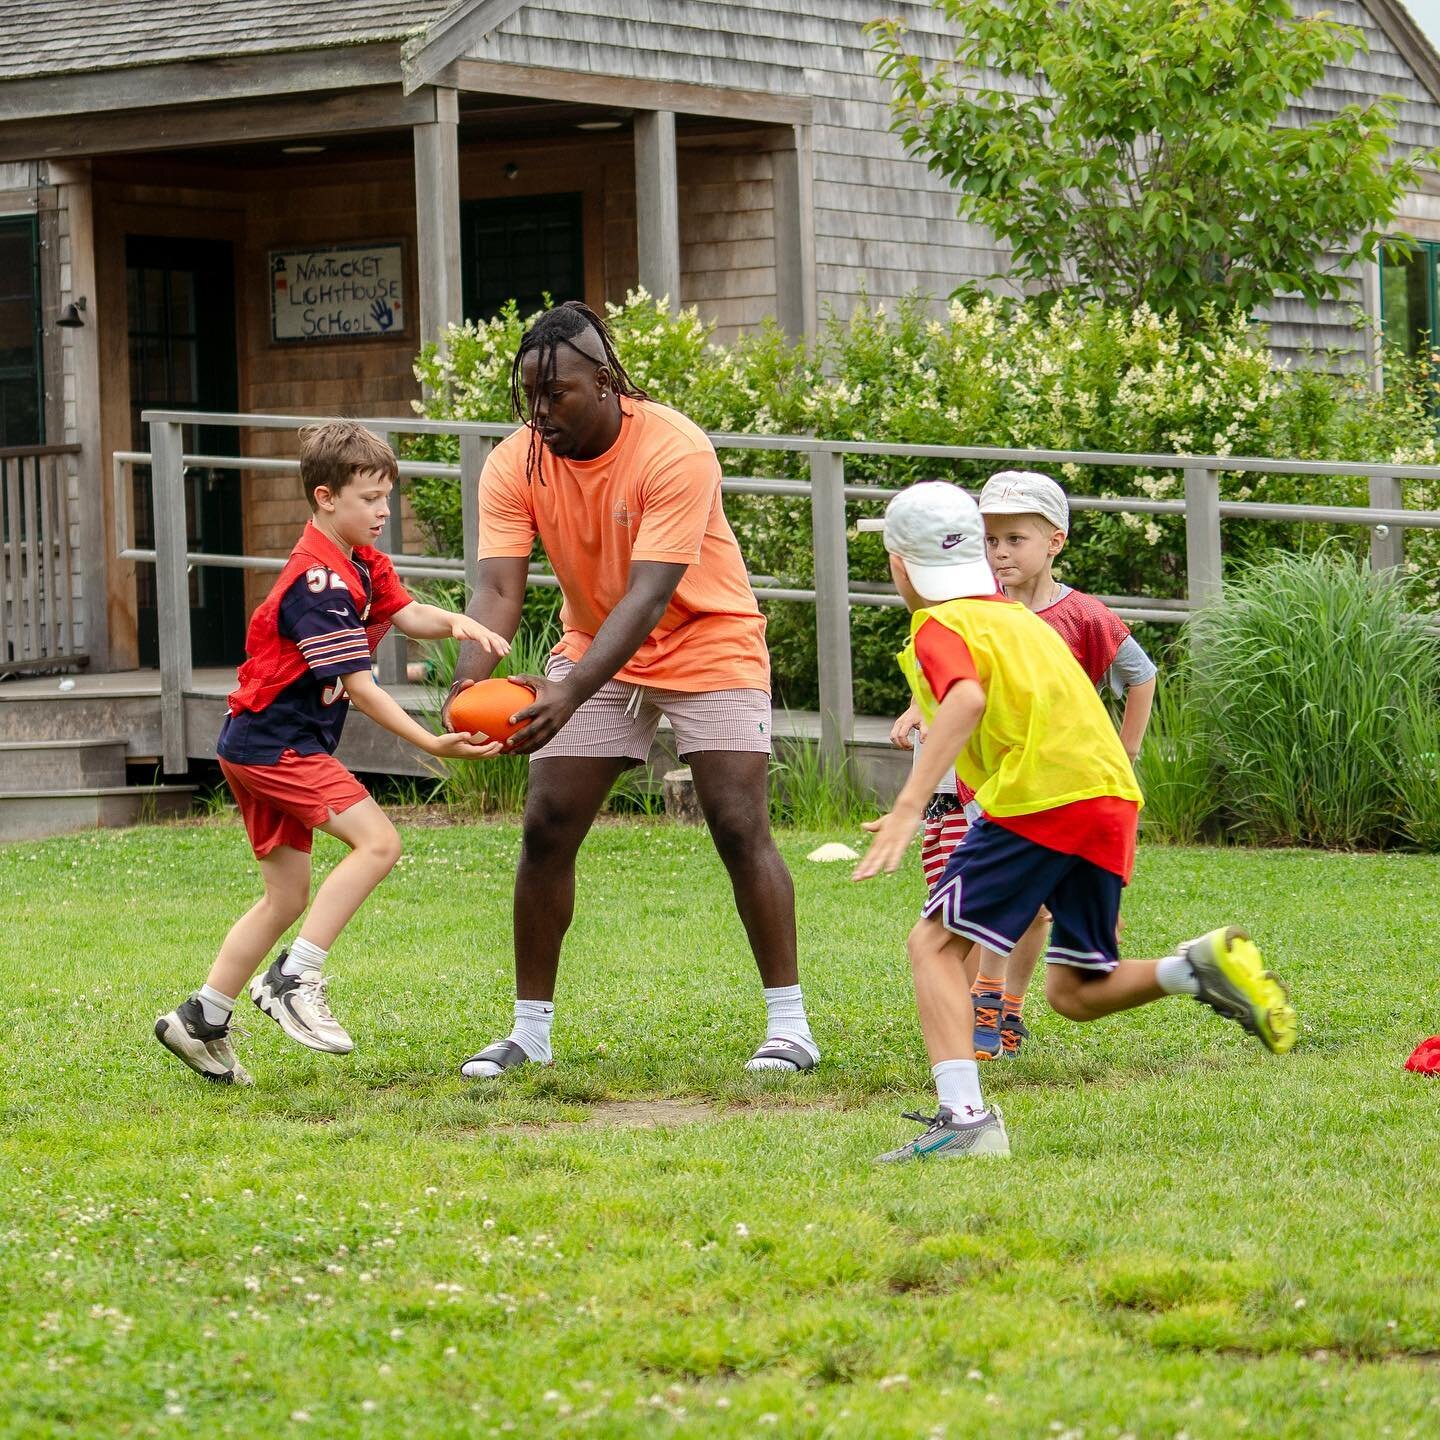 🏈 Camp Lighthouse is bringing the heat with some flag football frenzy! ⚡️ From exhilarating plays to big smiles, every moment is a touchdown of fun and friendship. Let the football fever ignite at Camp Lighthouse! 🌟🌞 #CampLighthouse #flagfootballf